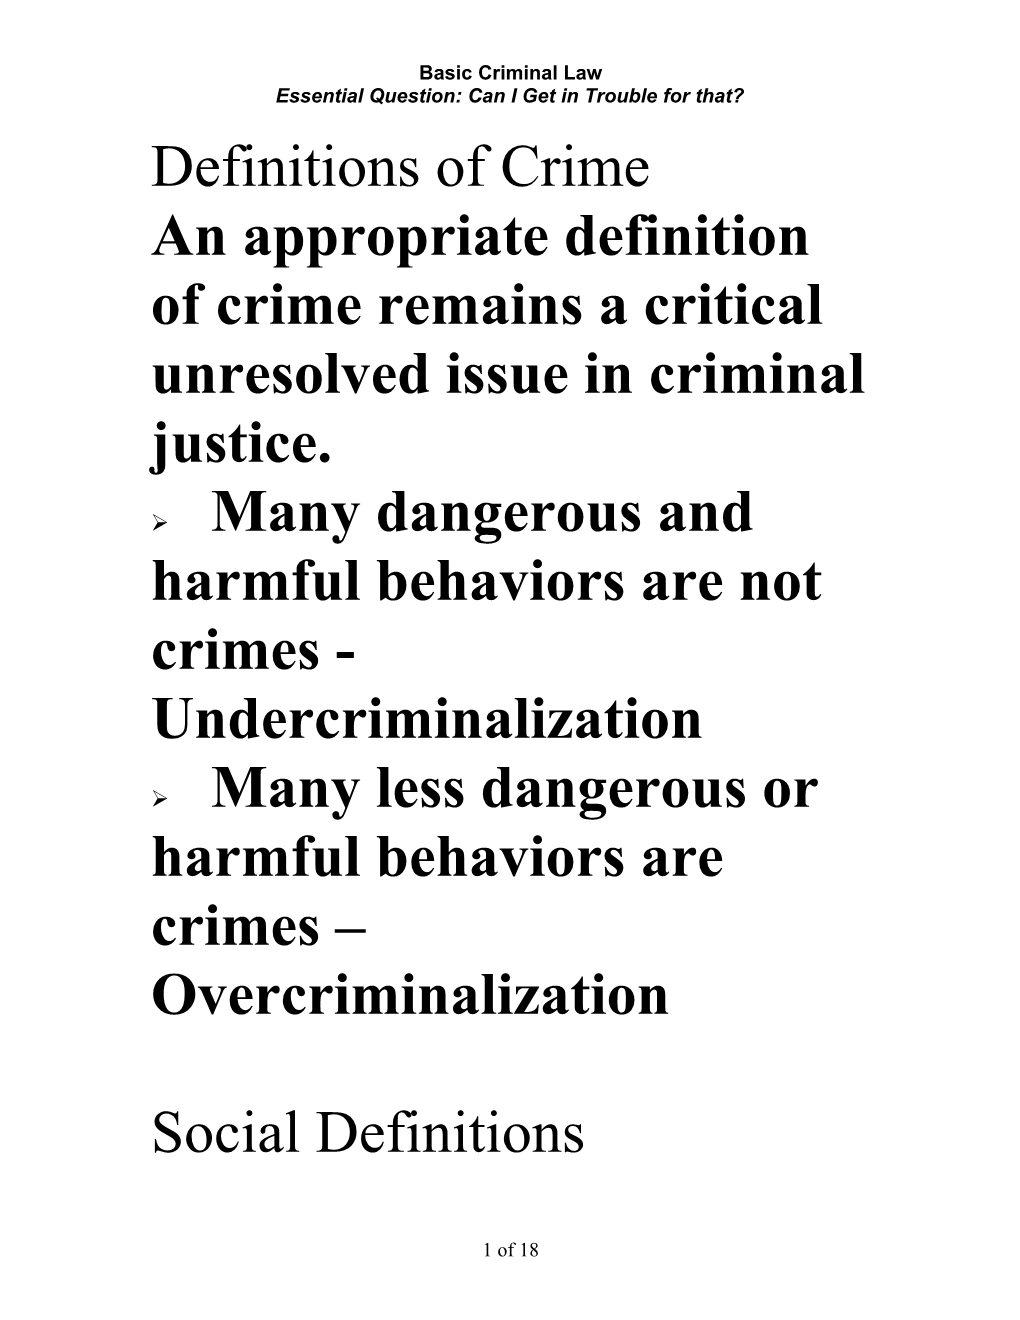 Definitions of Crime